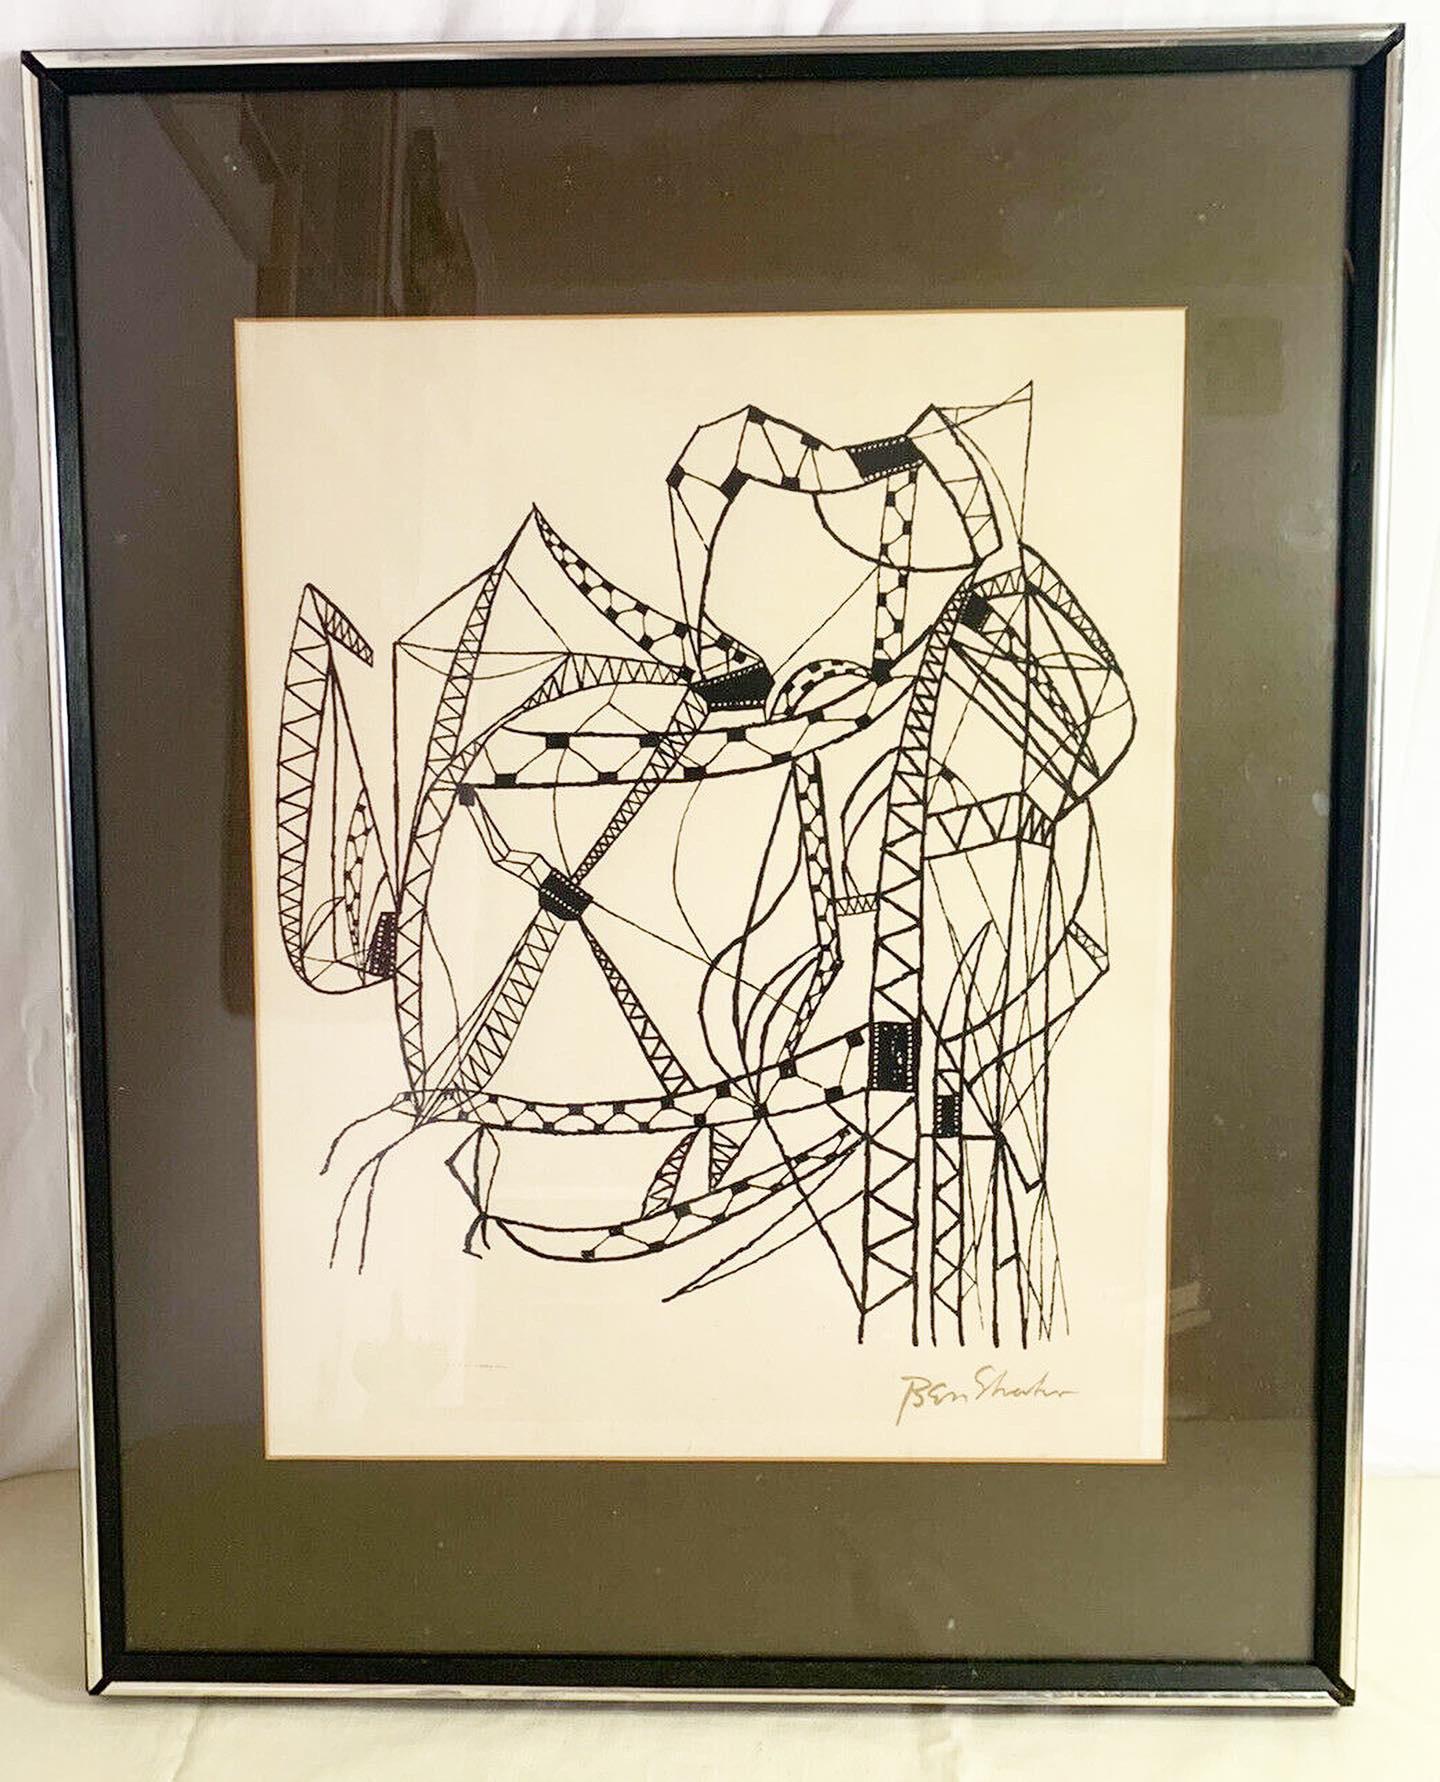 Modern Many Cities from the Rilke Portfolio, Framed Lithograph by Ben Shahn 1968 For Sale